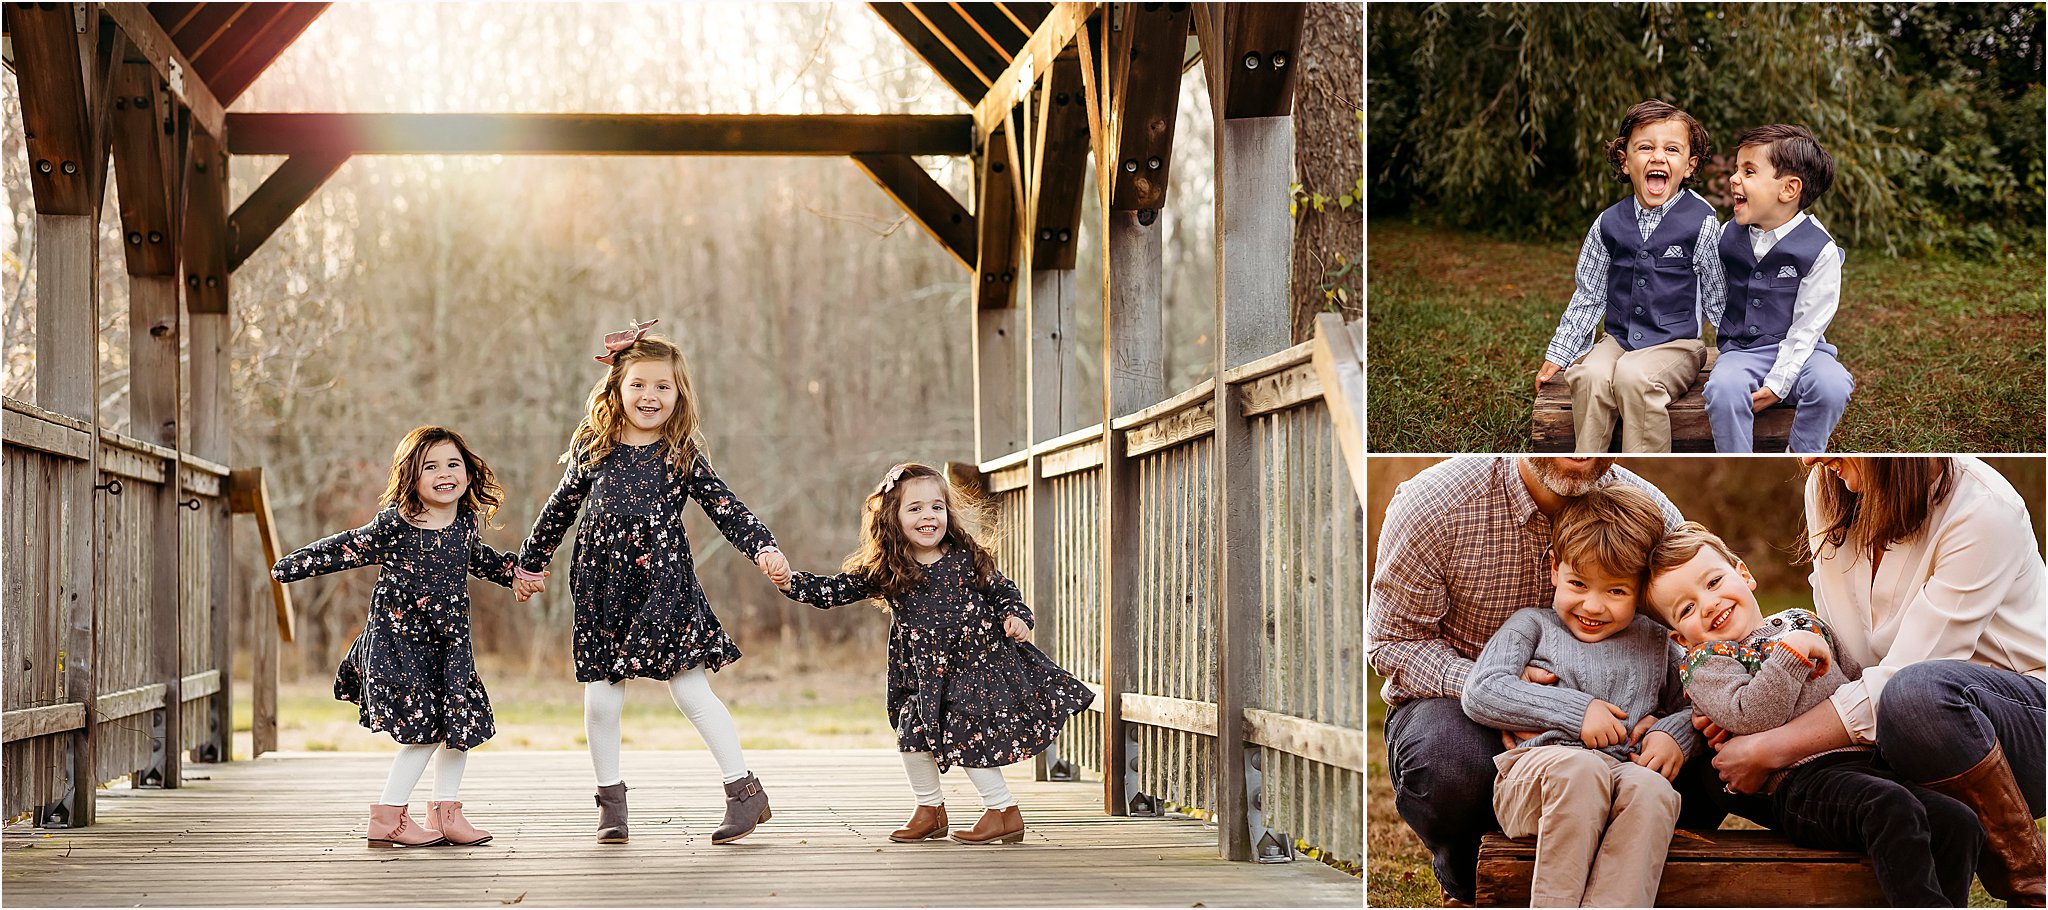 children playing at a park, Tips to look your best for a family photo session, CT Best family photographer